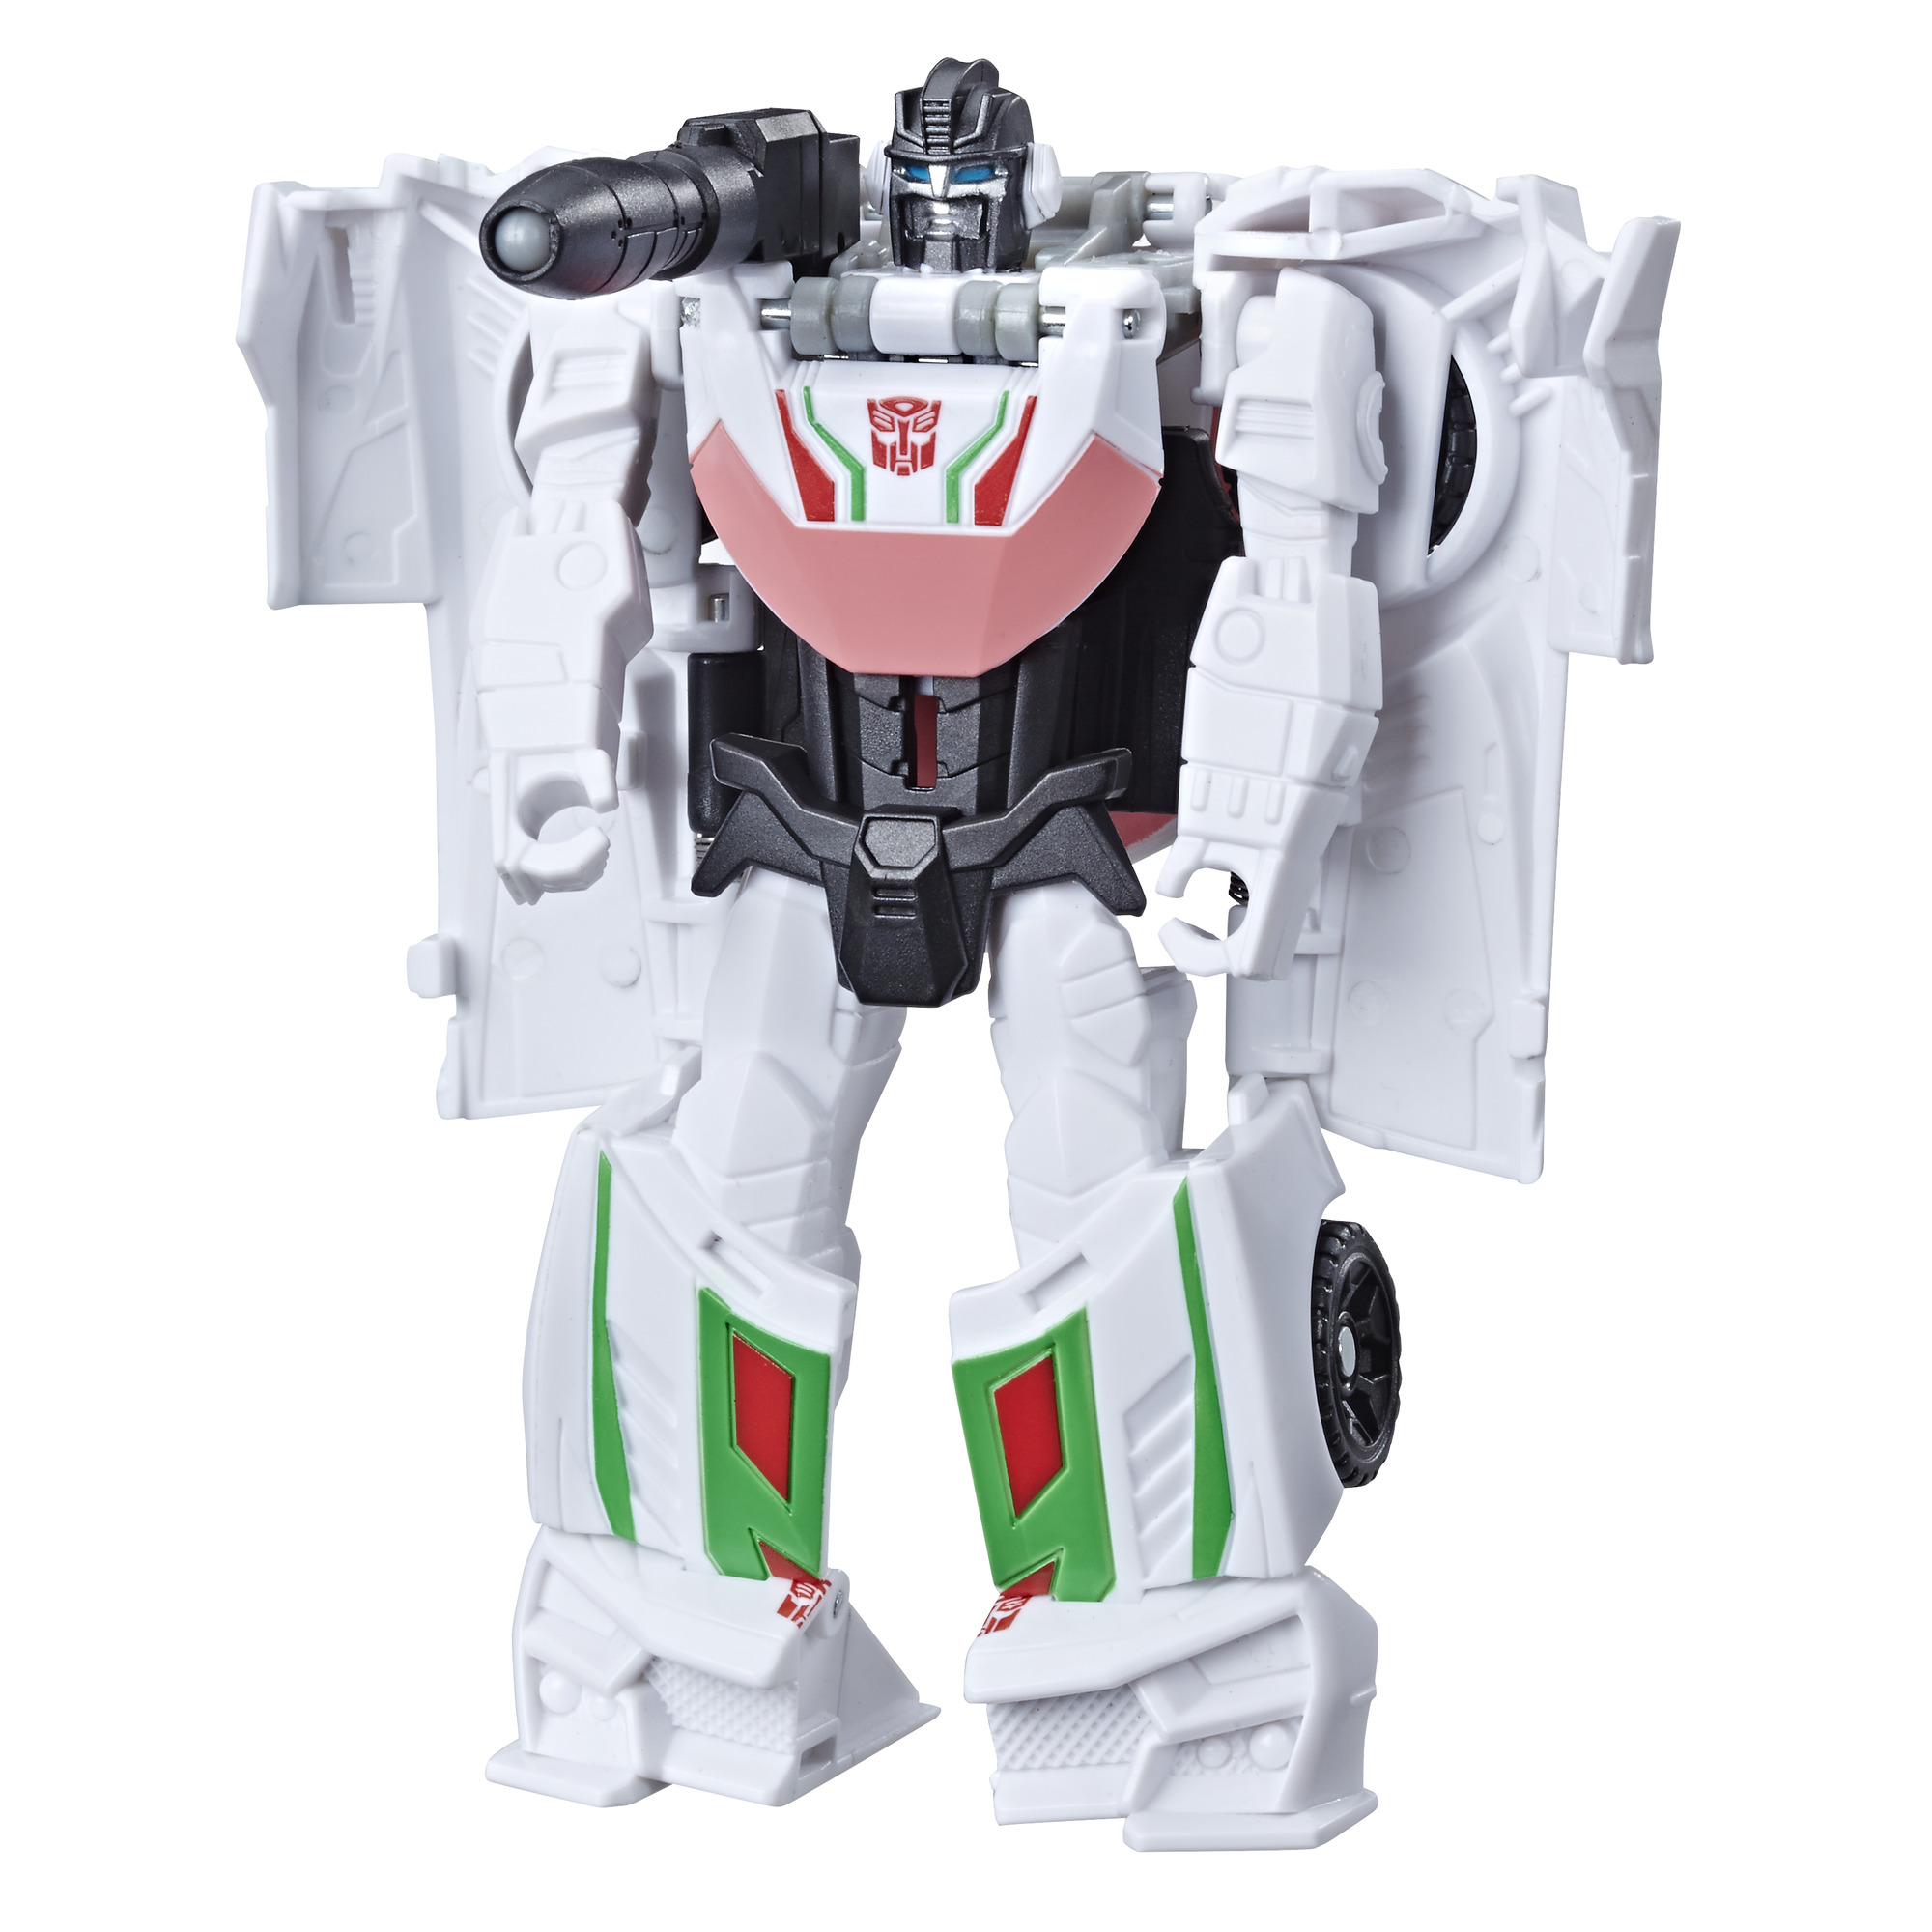 Transformers Cyberverse Action Attackers: 1-Step Changer Wheeljack Action Figure - image 1 of 5